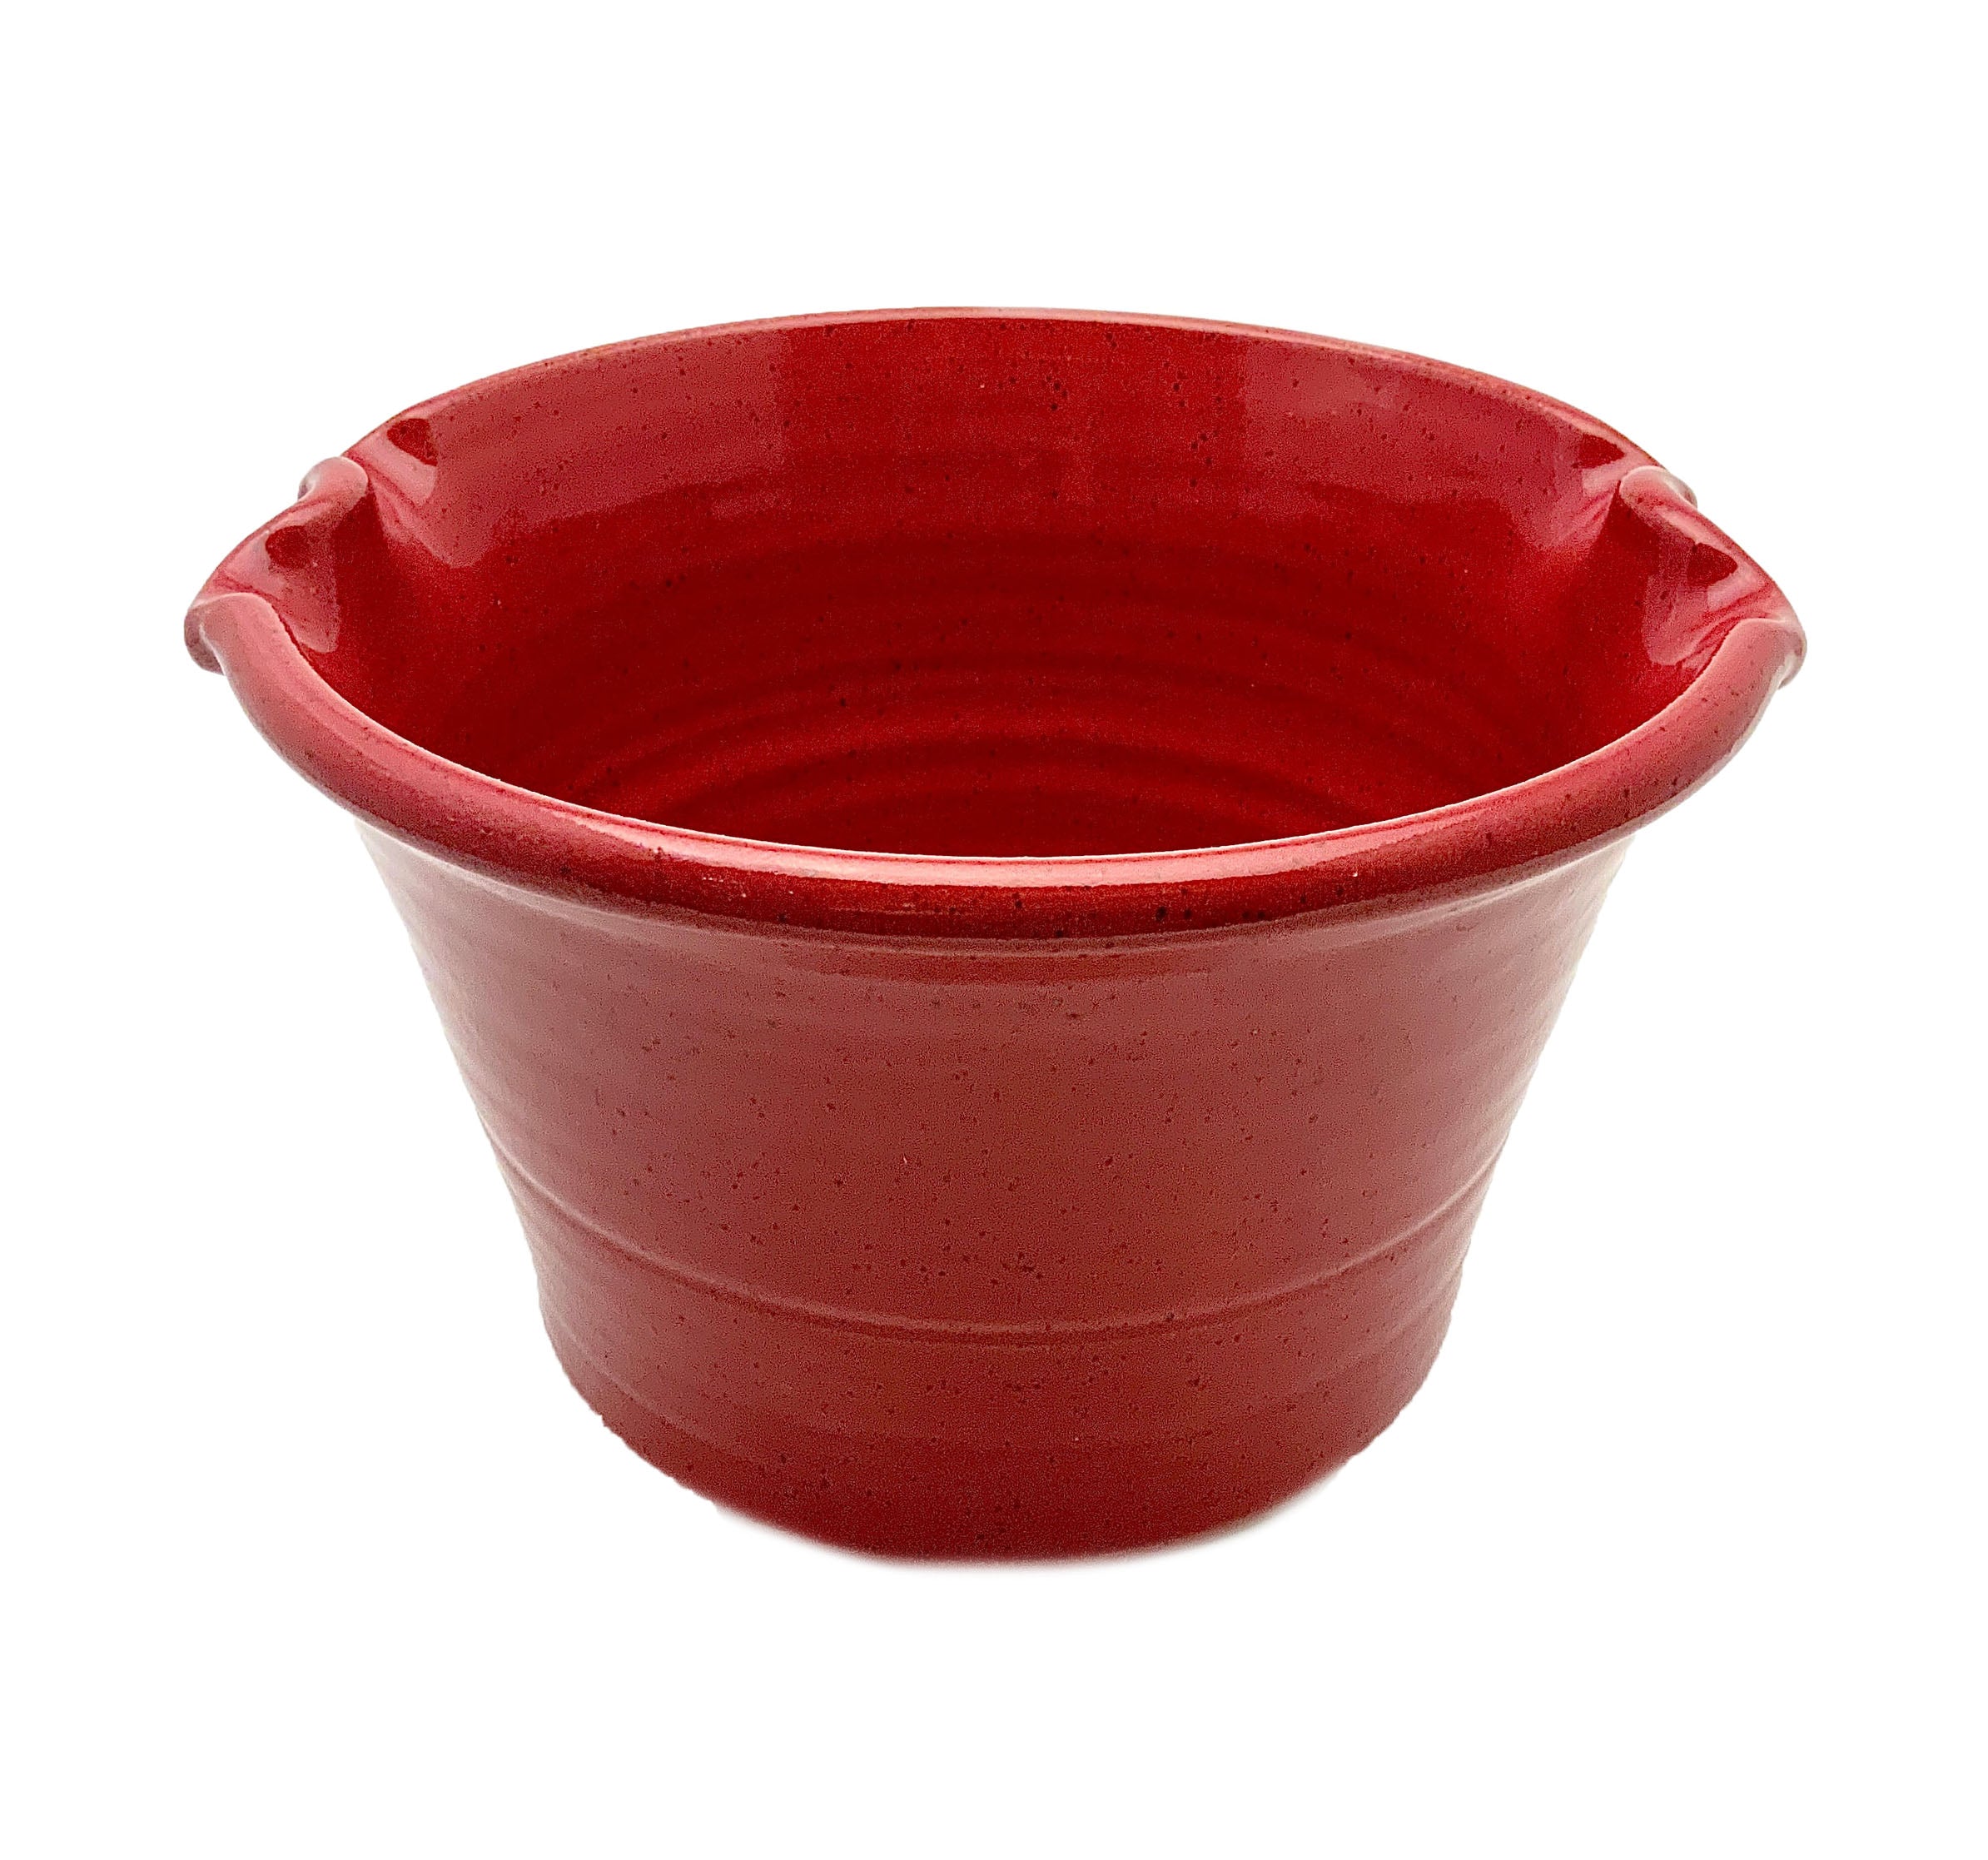 RED SPECKLED PINCHED BOWL